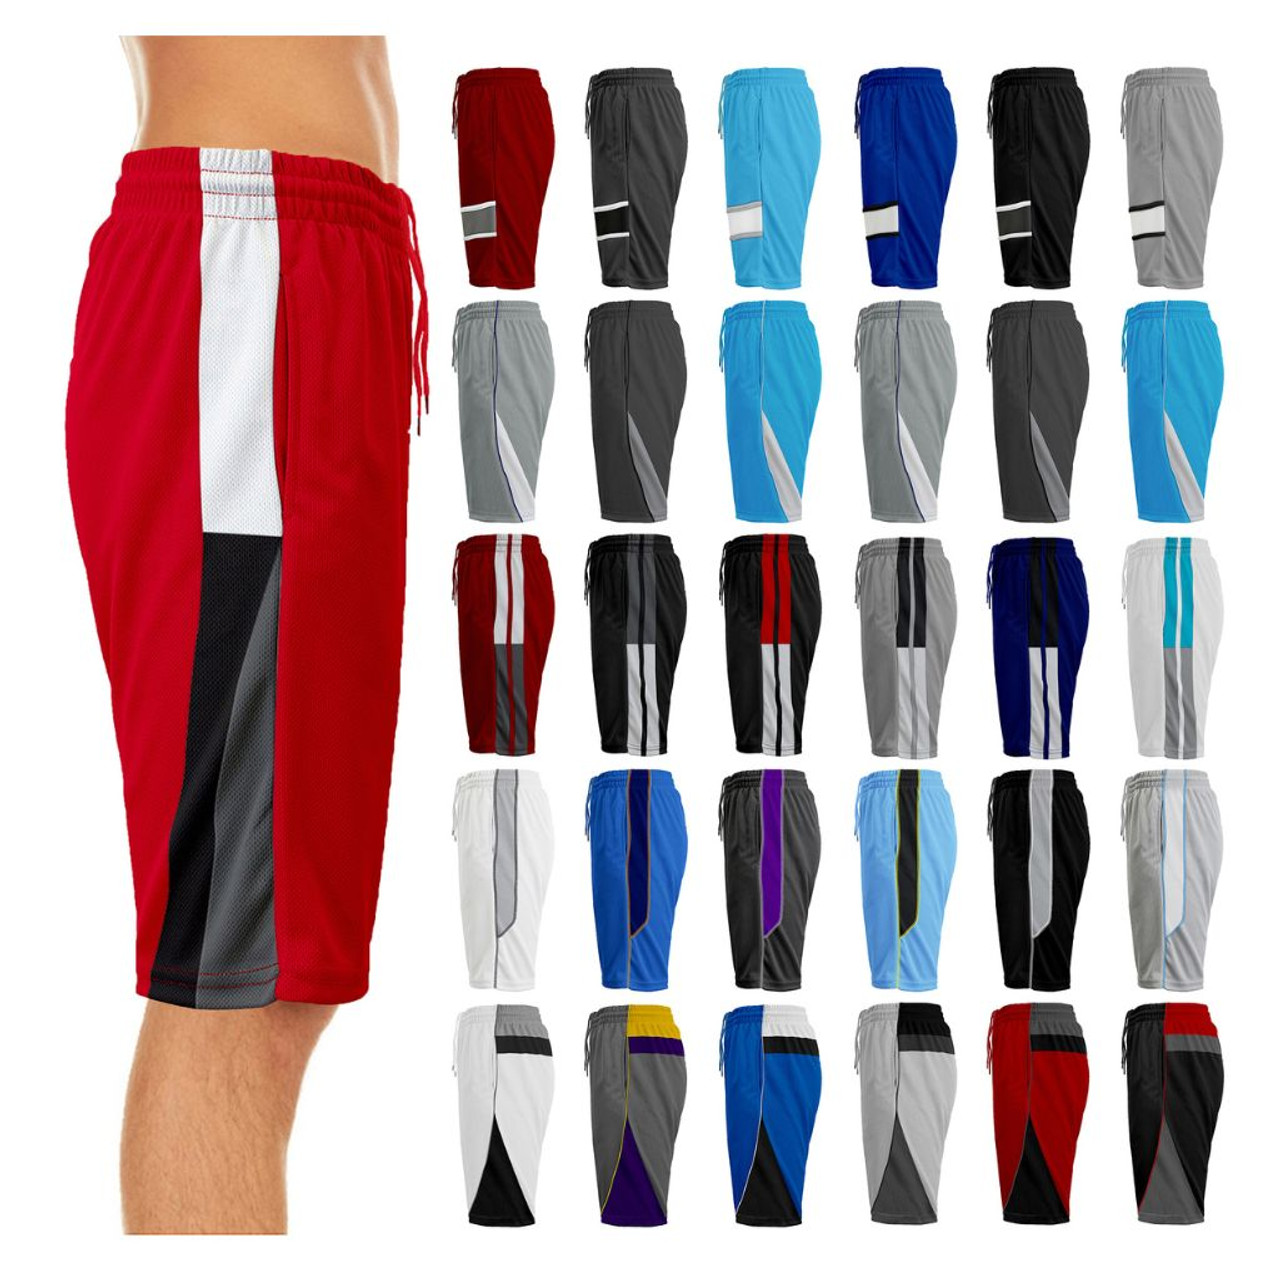 Men's Active Moisture-Wicking Mesh Shorts (2- or 3-Pack) product image